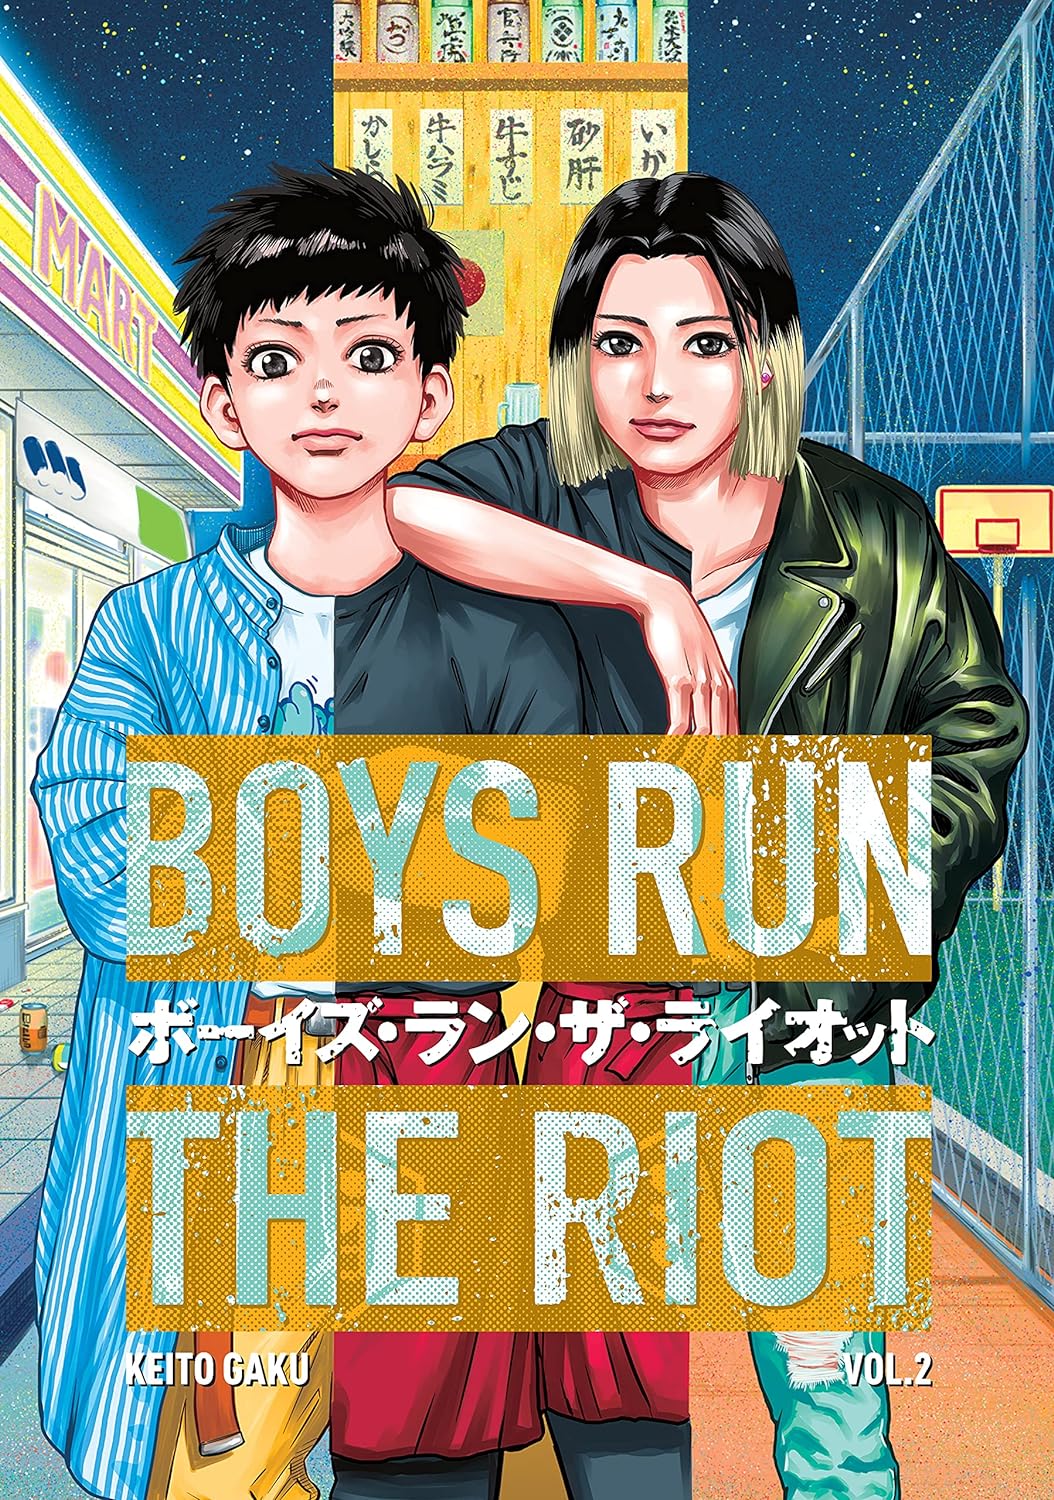 The book cover for Boys Run the Riot #2 shows two Japanese teenage boys standing side by side by a basketball court and mart, looking at the viewer.